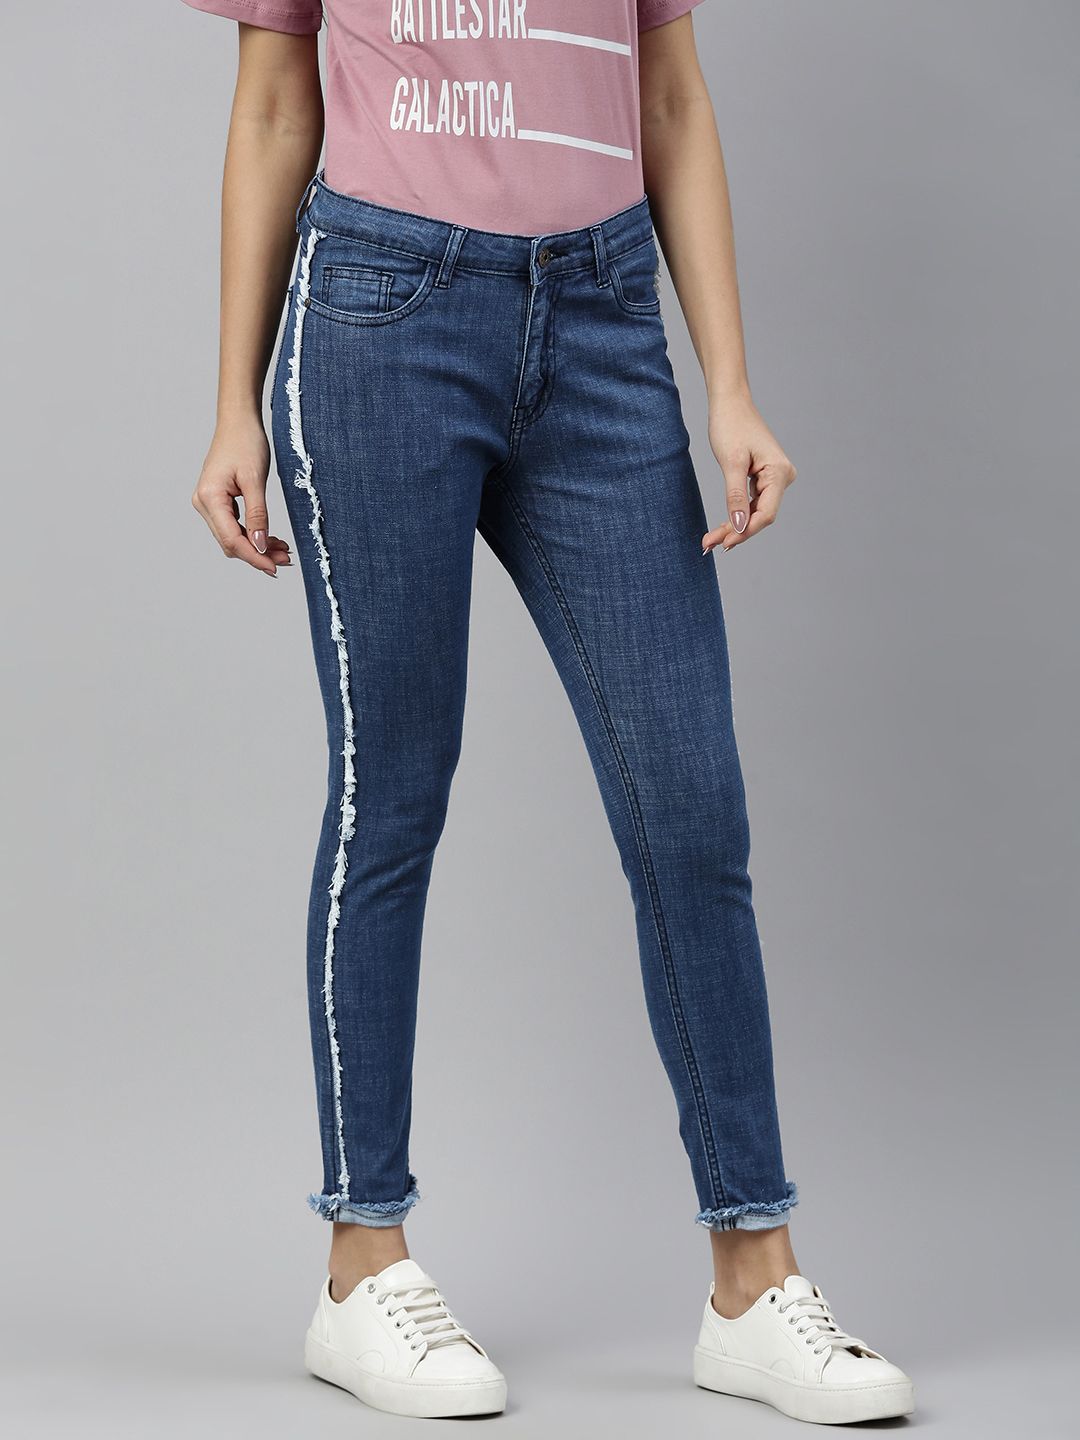 abof Women Blue Slim Fit Stretchable Jeans Price in India